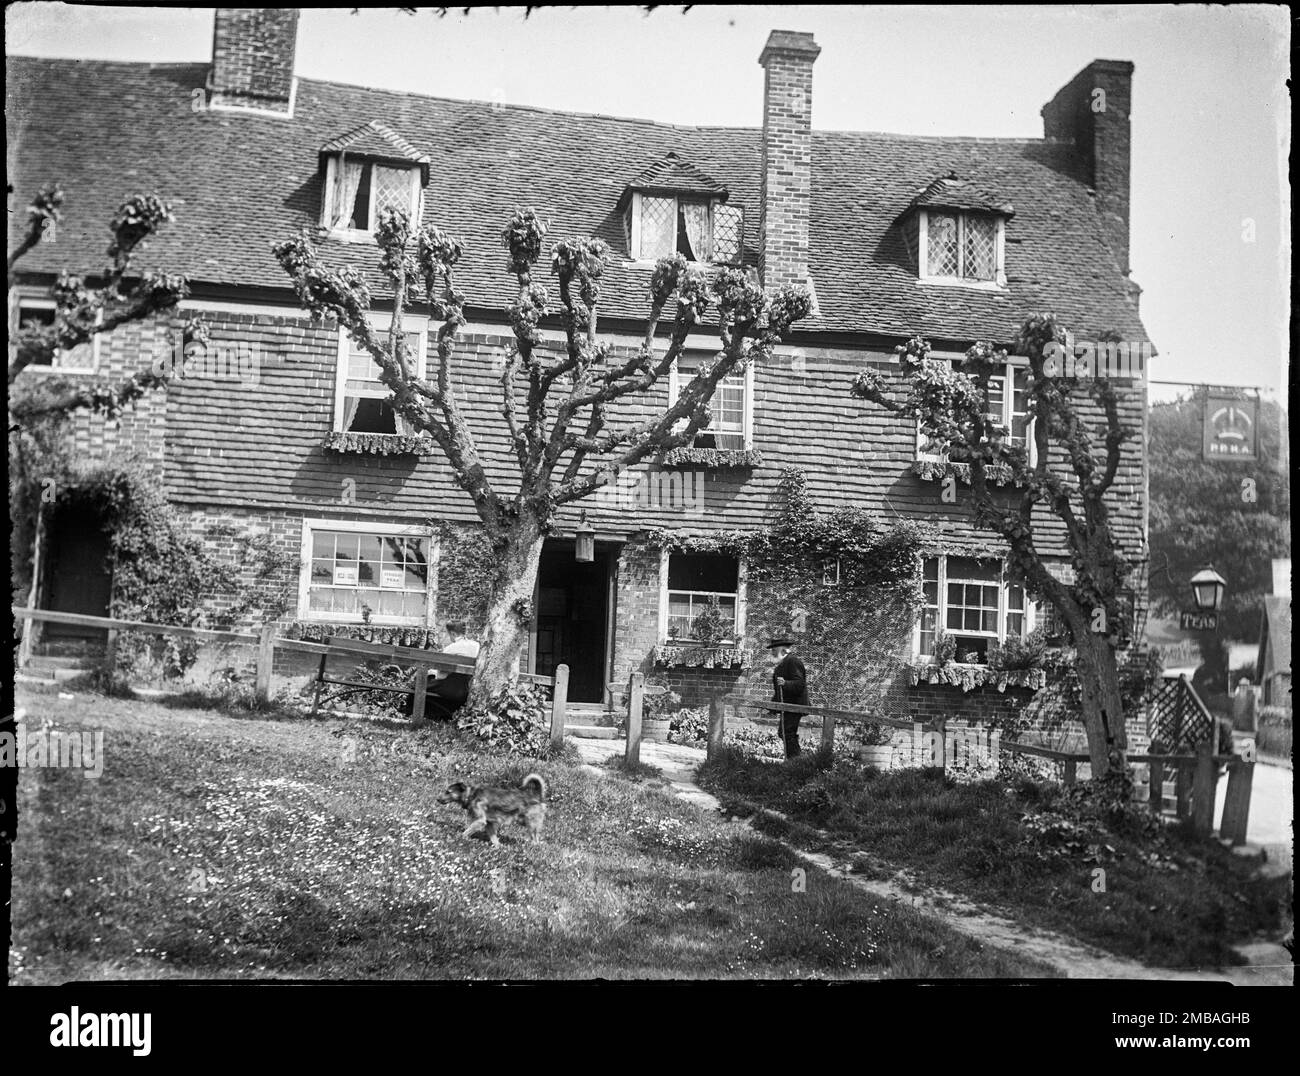 The Crown Inn, Groombridge, Speldhurst, Tunbridge Wells, Kent, 1911. The front of The Crown Inn seen from south on The Green, showing a dog in the foreground, a woman seated on a bench outside the pub and an elderly man walking past. The photograph also shows pollarded trees in front of the pub running along the footpath known as The Walks. In the negative index for the collection, the photographer has referred to 'old man &amp; MM'. MM may be a reference to her older sister Margaret Mary MacFee. Stock Photo